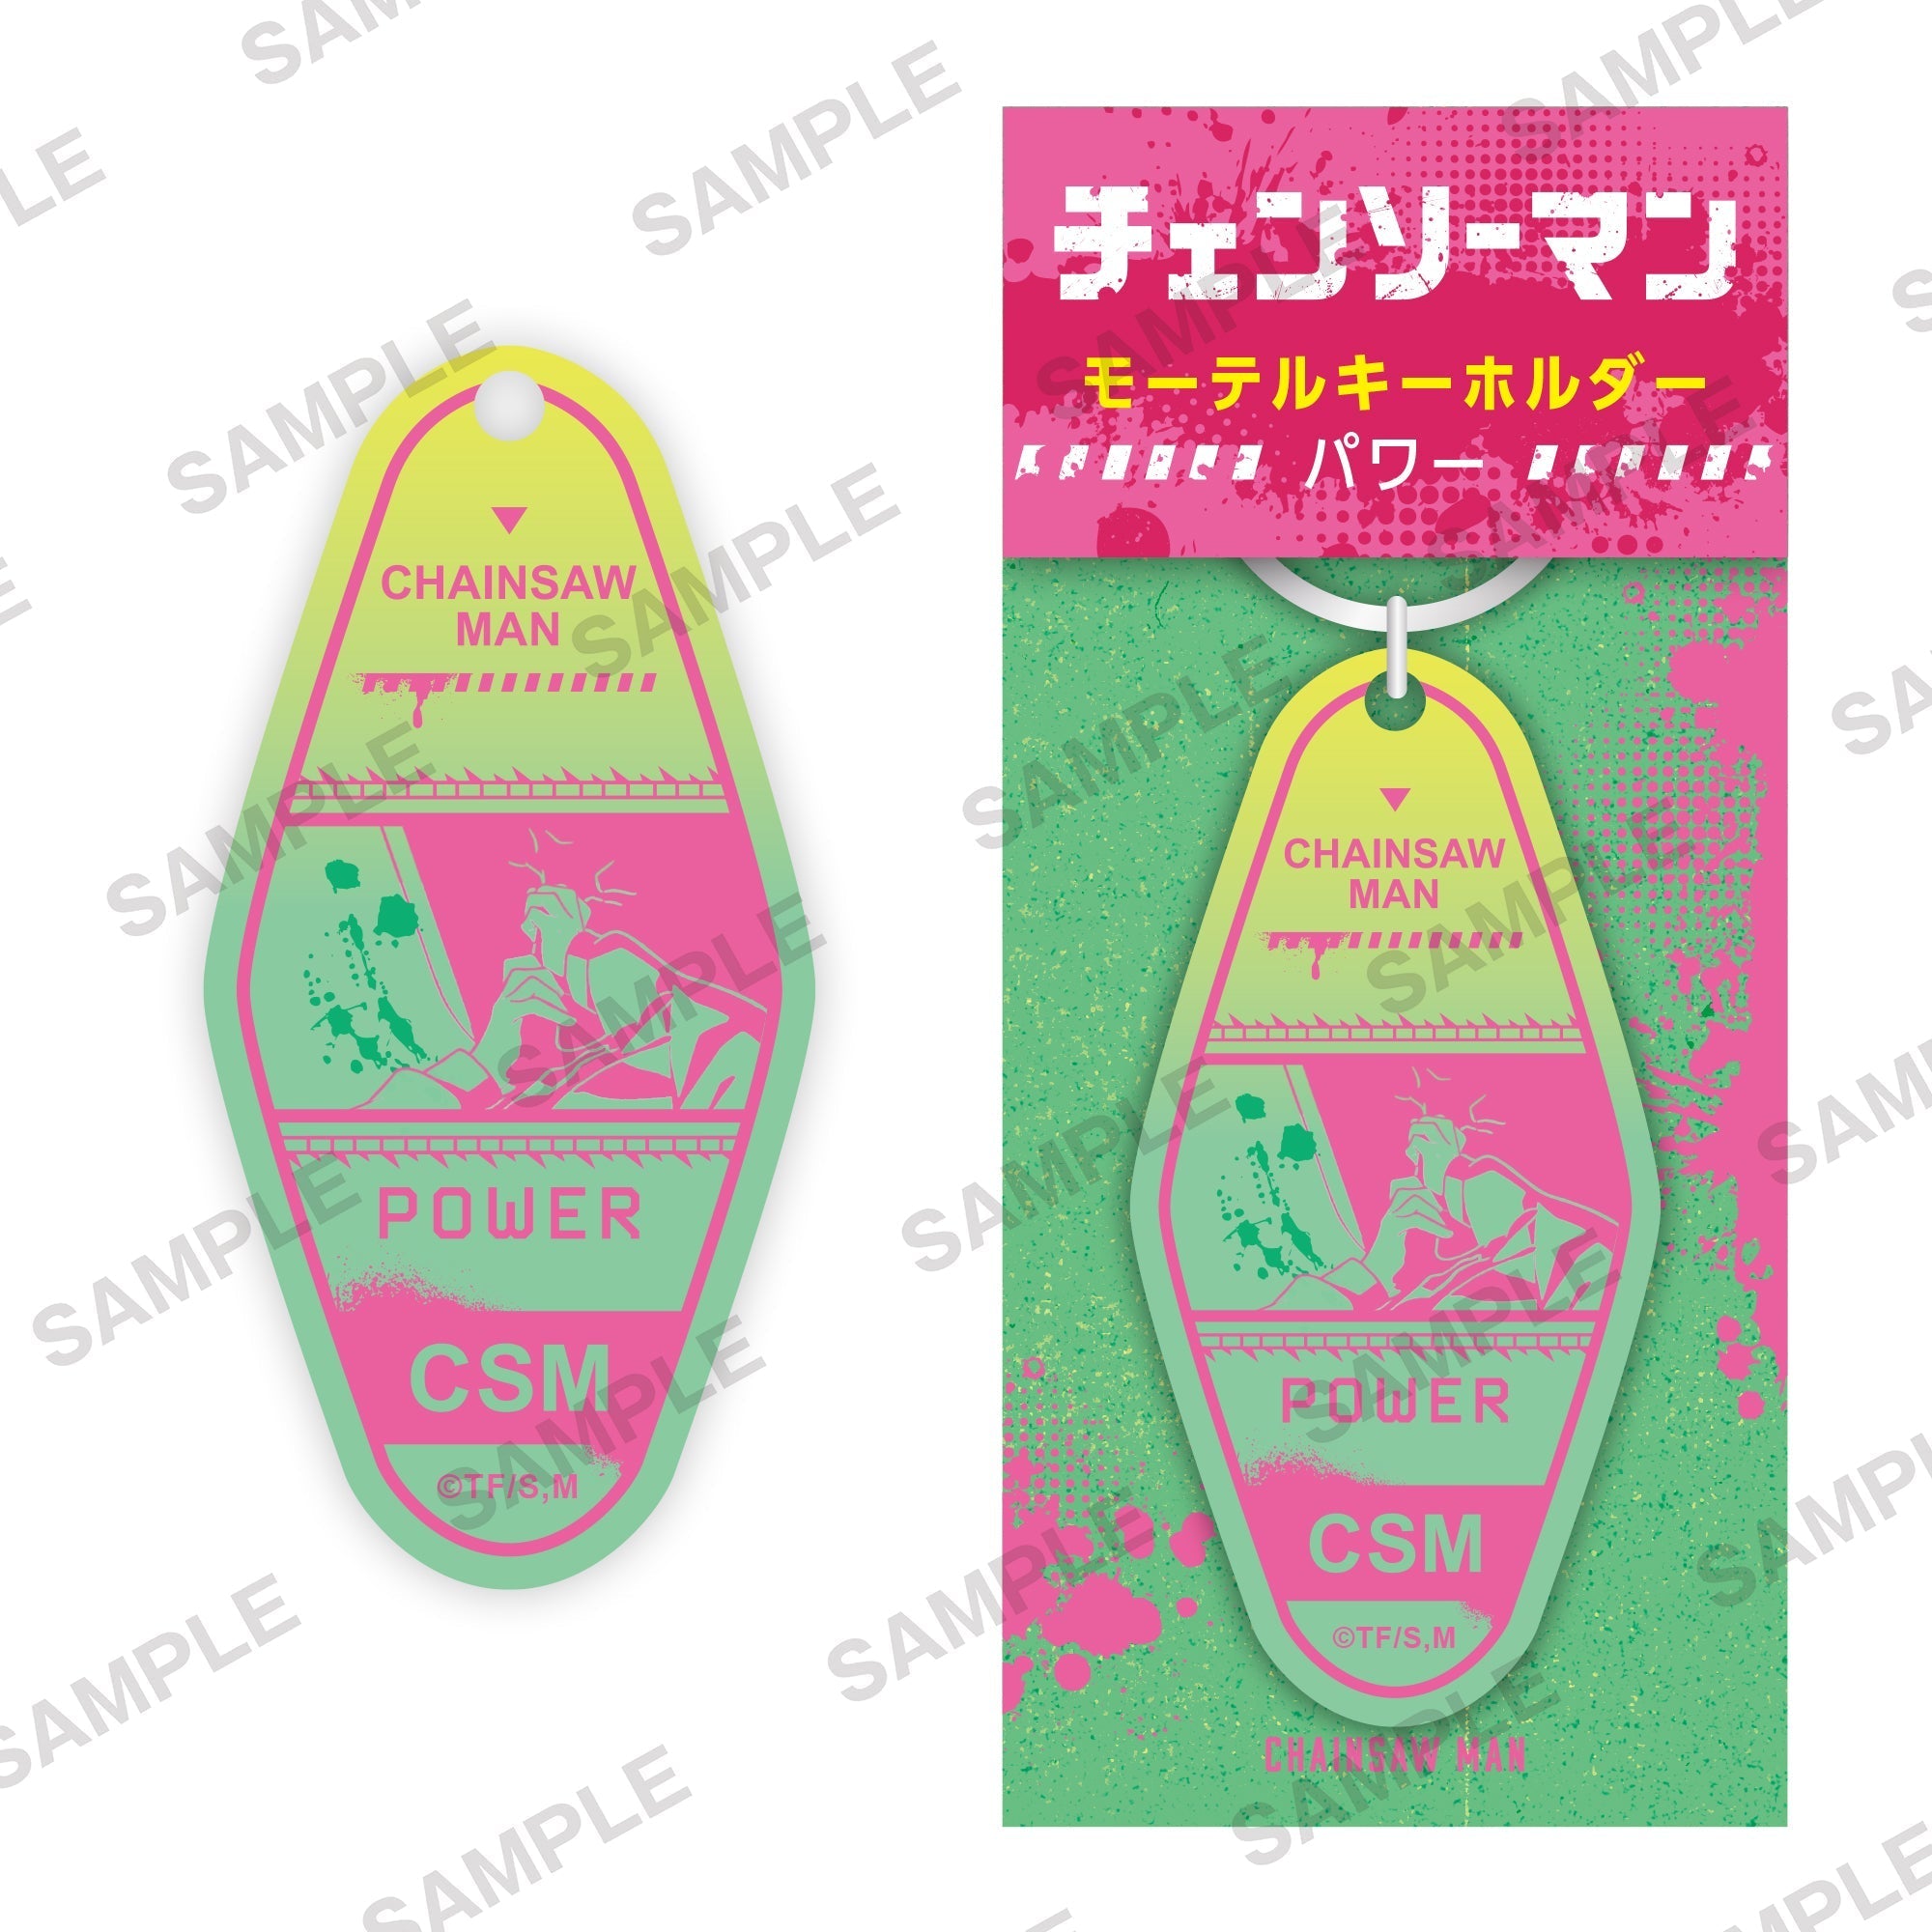 Chainsaw Man - Power Motel Keychain image count 0